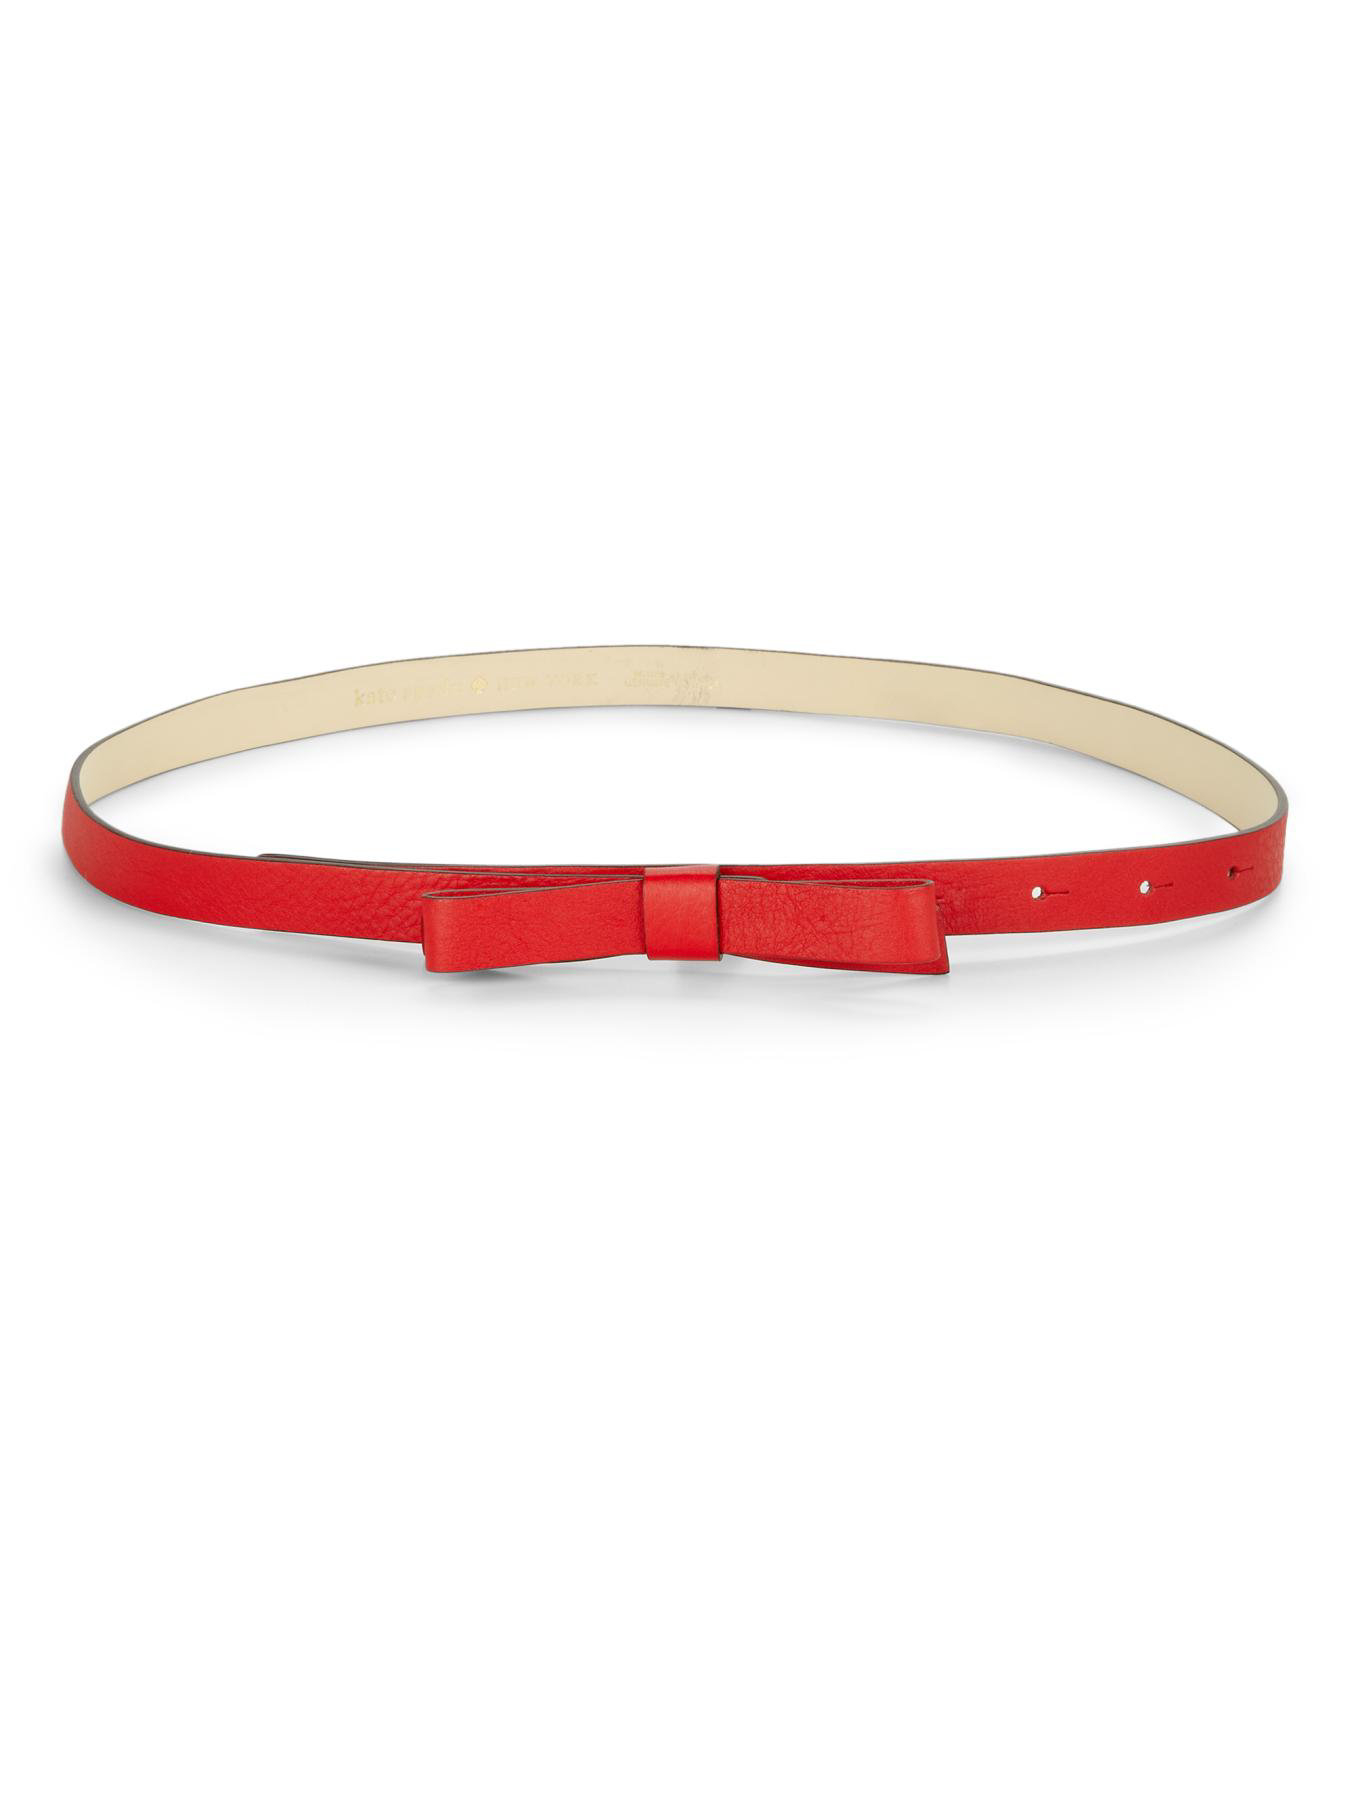 Kate Spade Skinny Leather Bow Belt in Red (GERANIUM) | Lyst